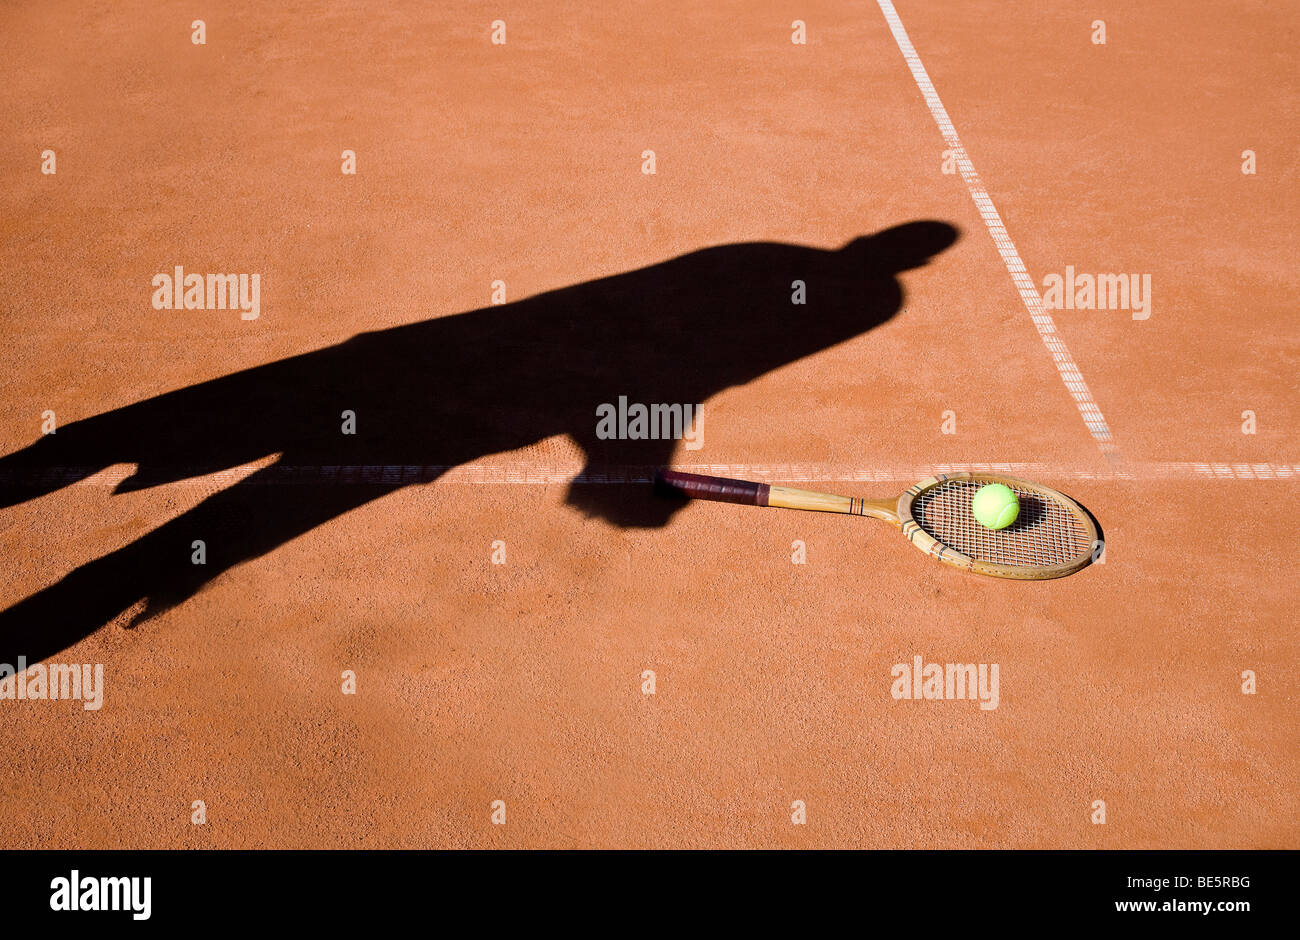 Shadow of a person playing tennis Stock Photo